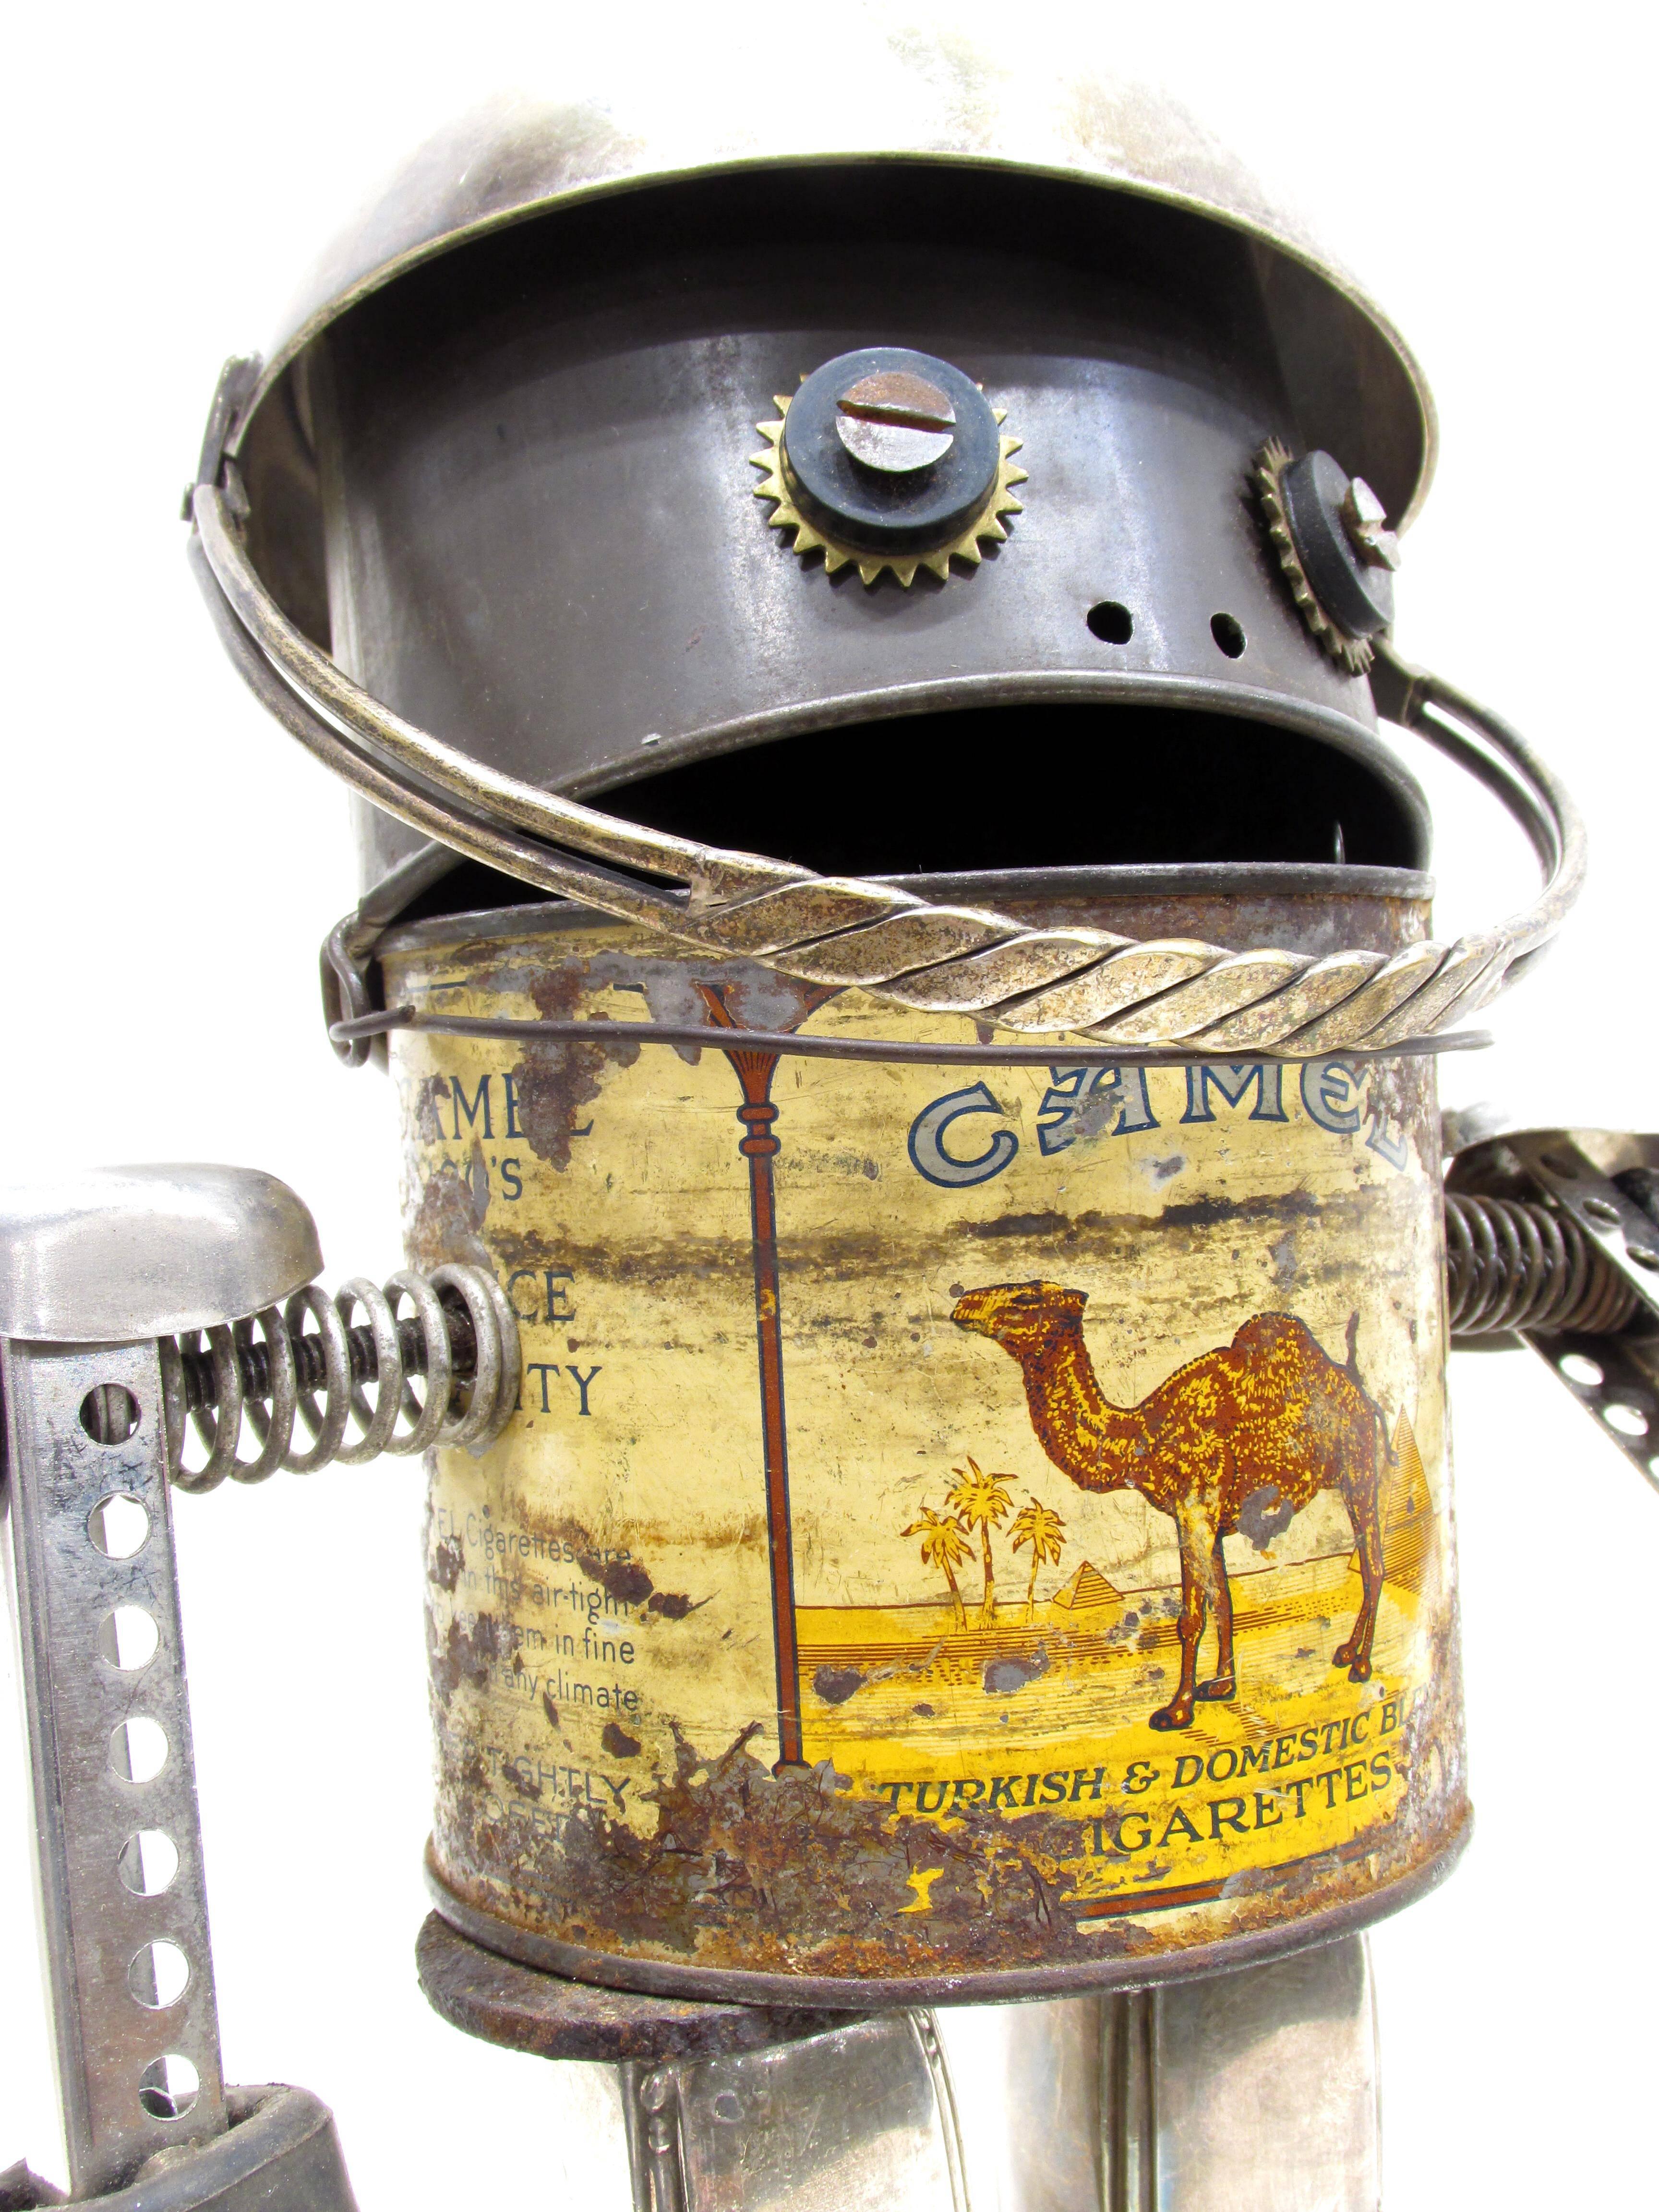 Camel Cigarettes Found Object Robot 1